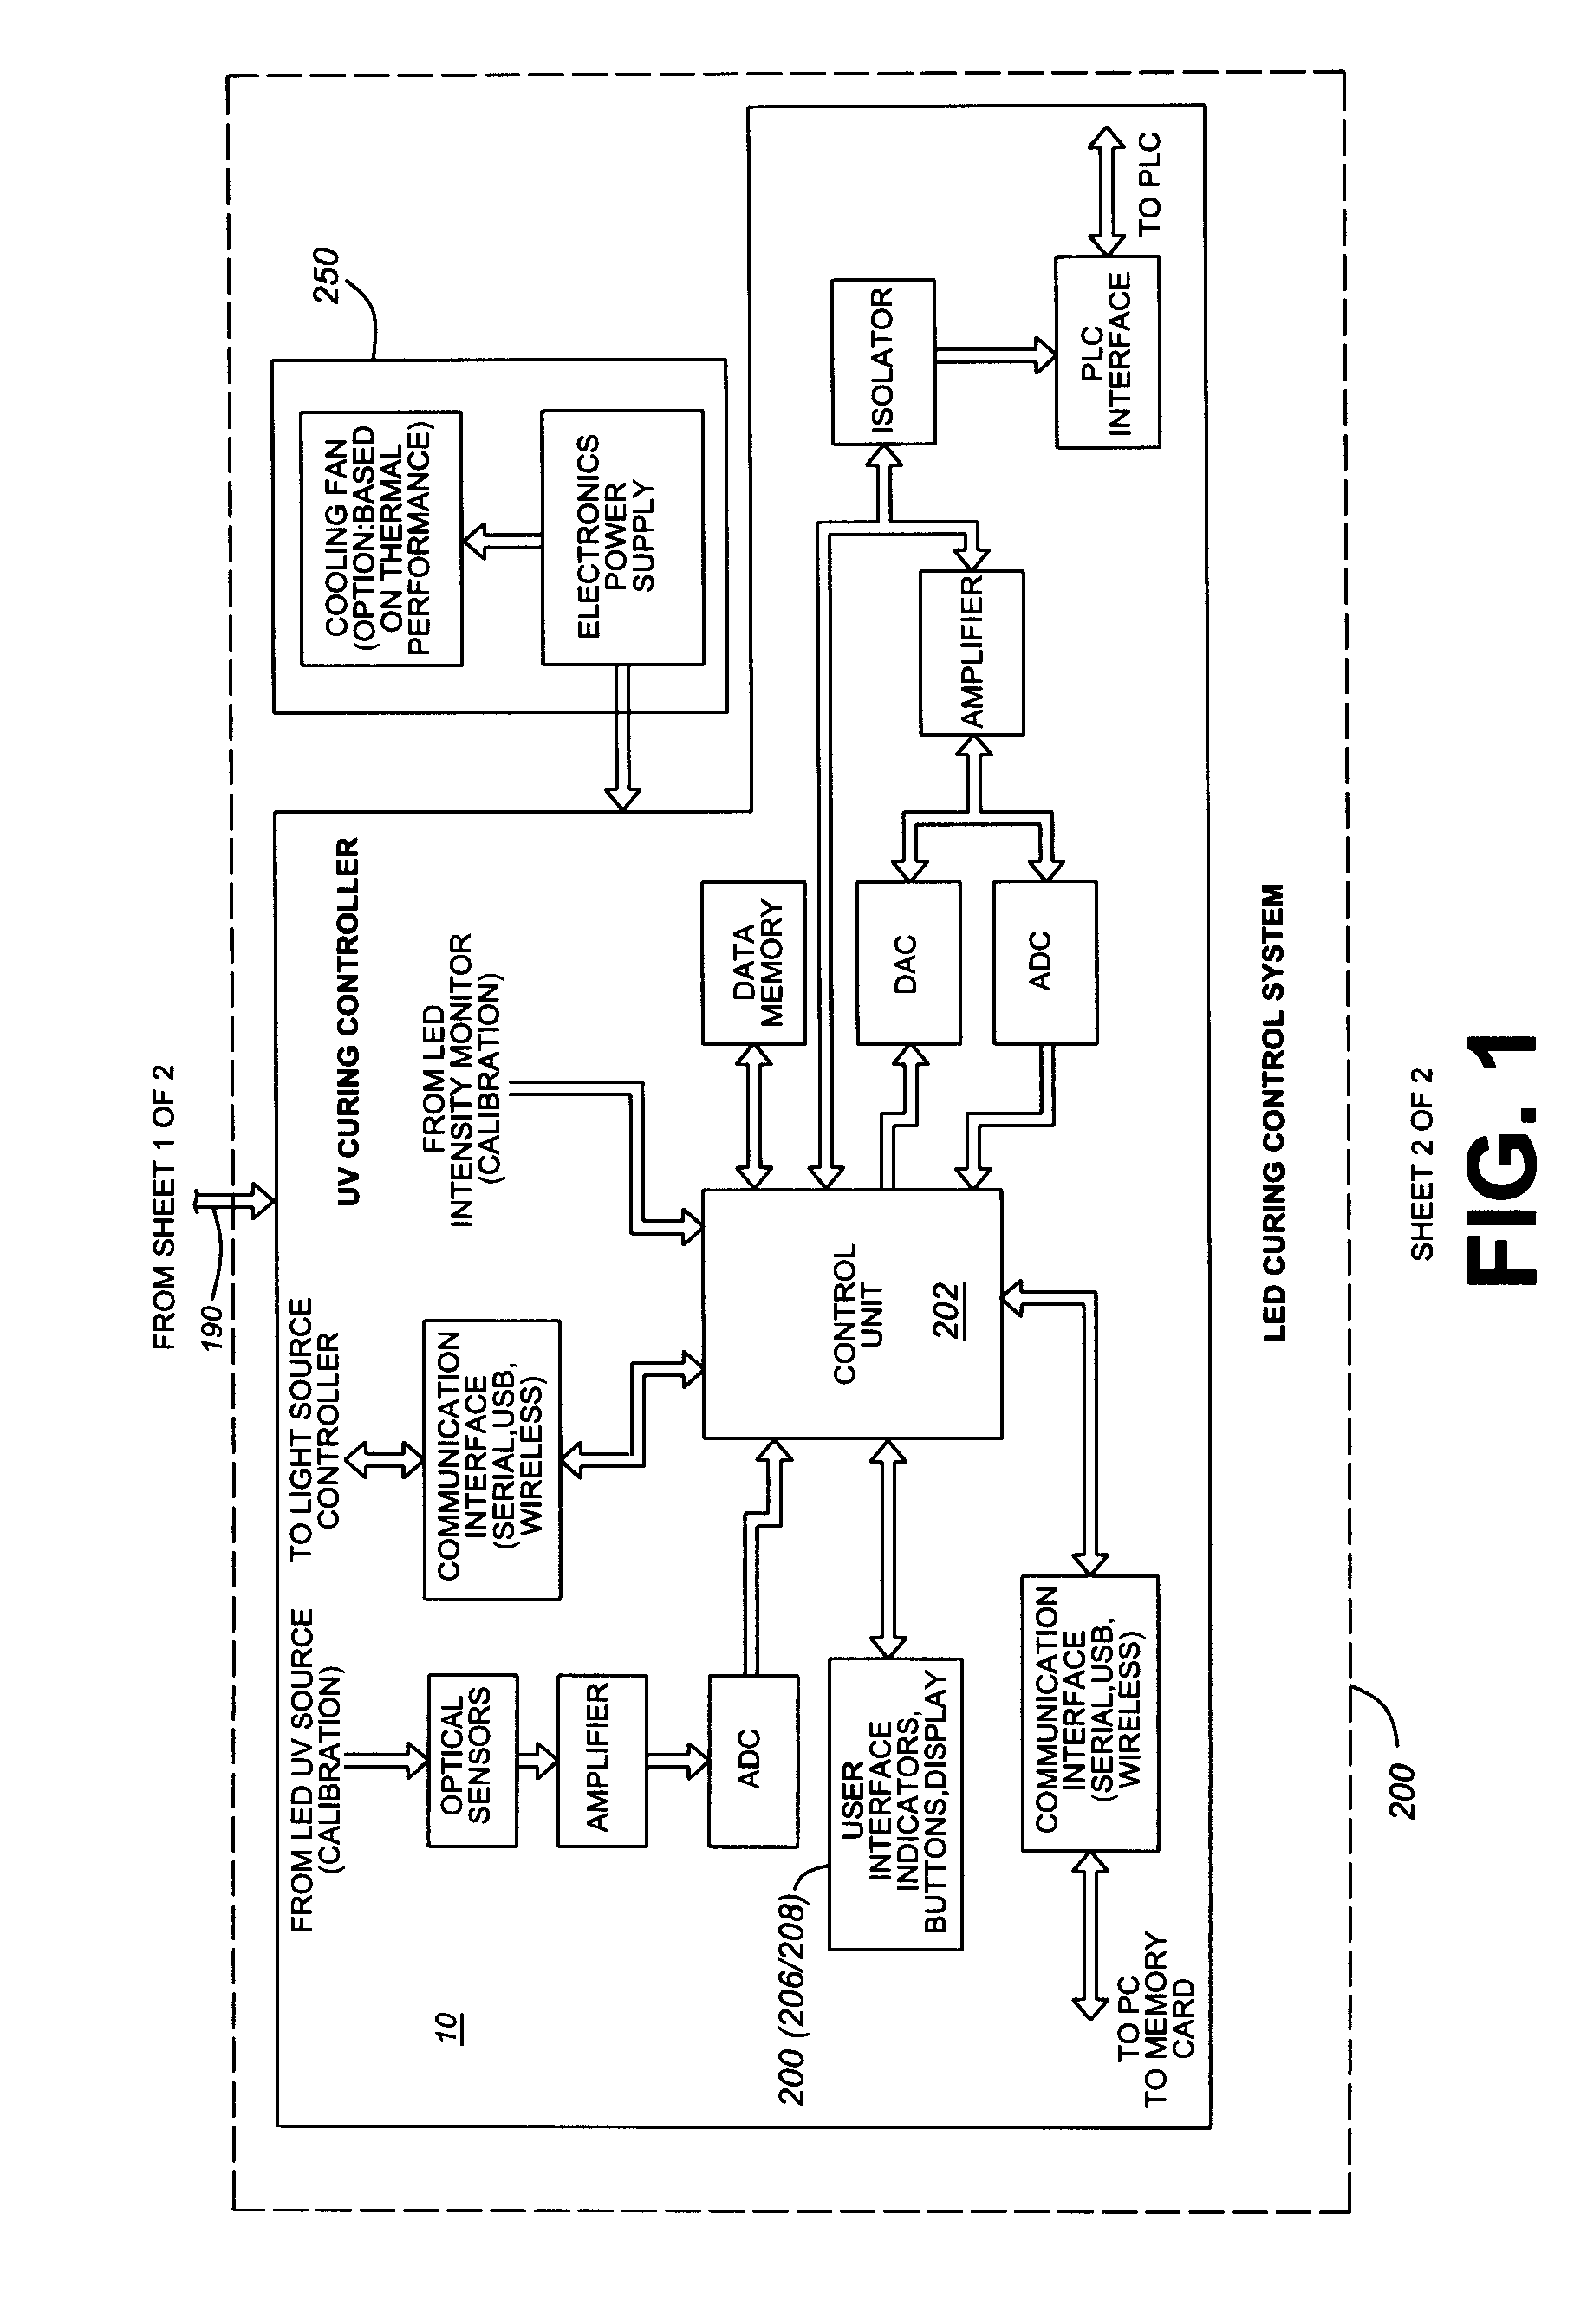 System, method and portable controller for programming and calibration of a plurality of light source units for photo-reactive/curing applications